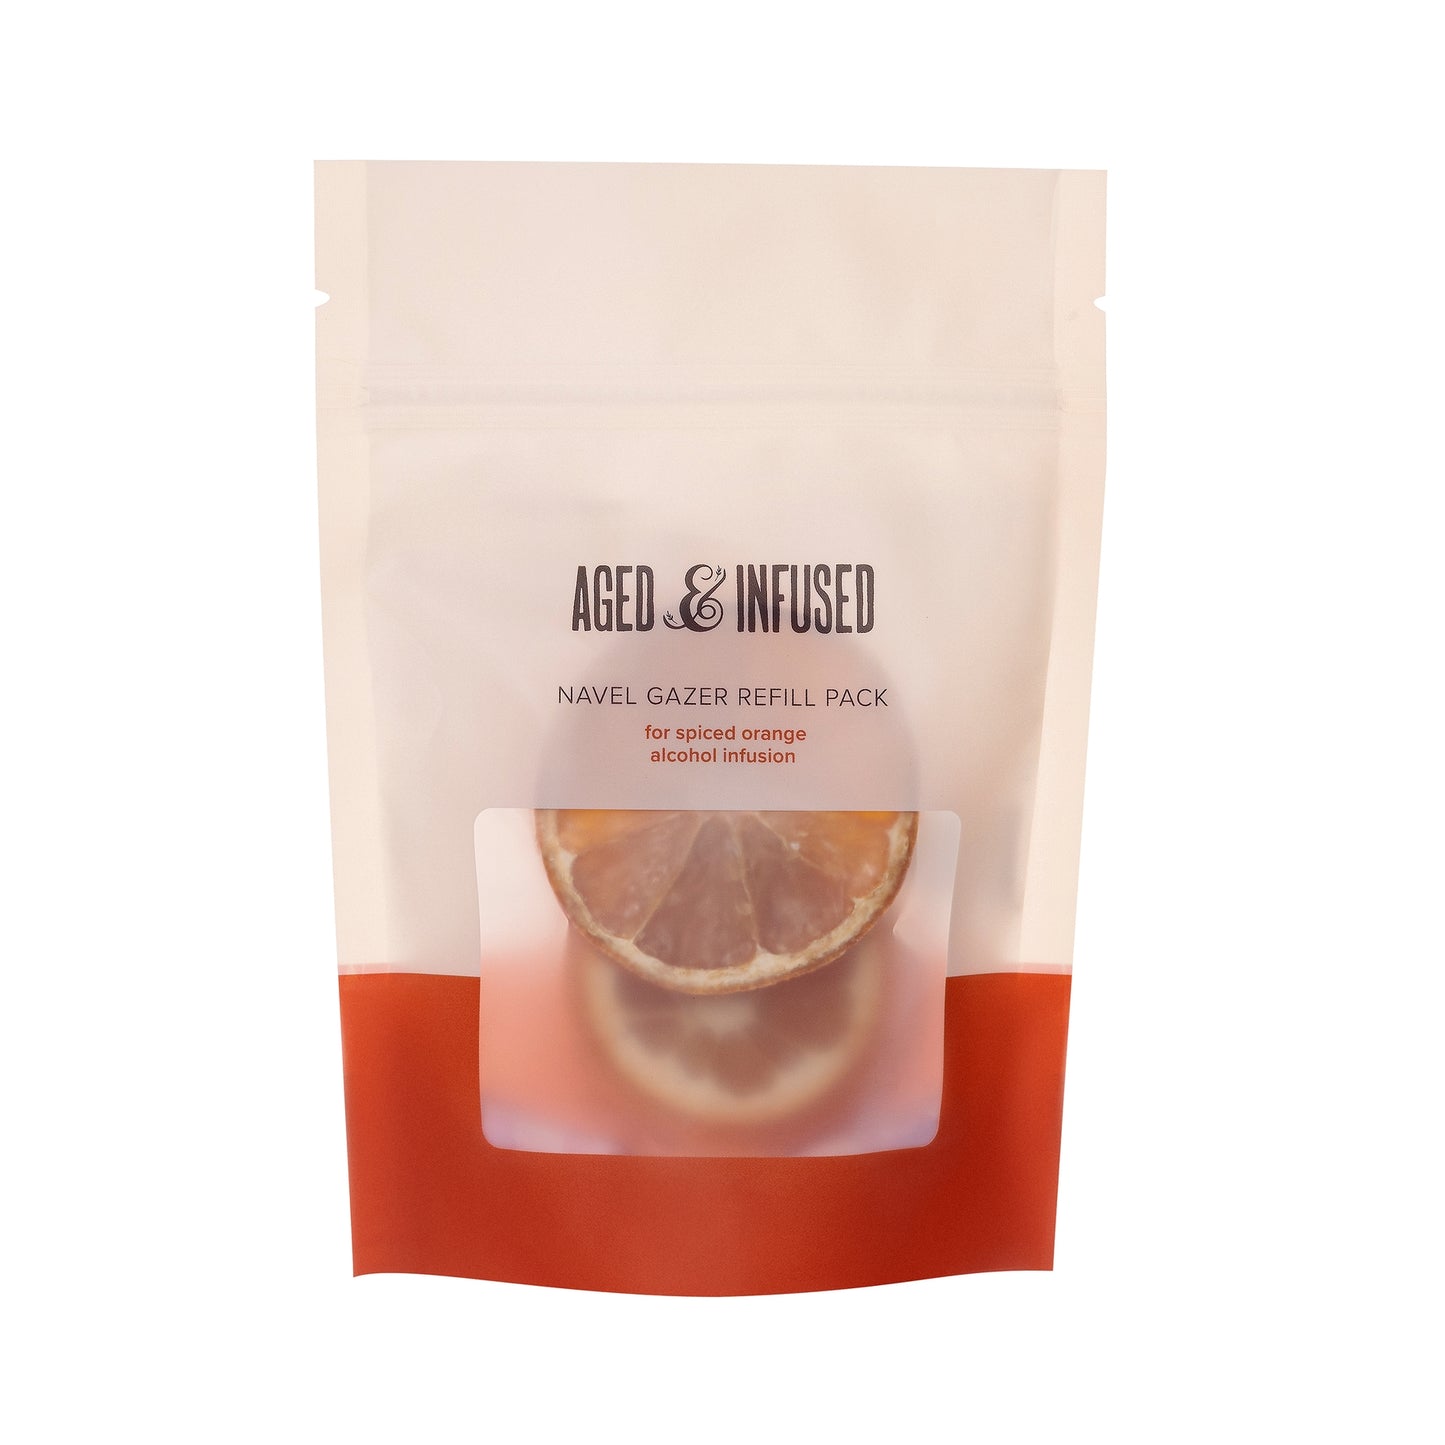 Aged and Infused Navel Gazer Refill Pack